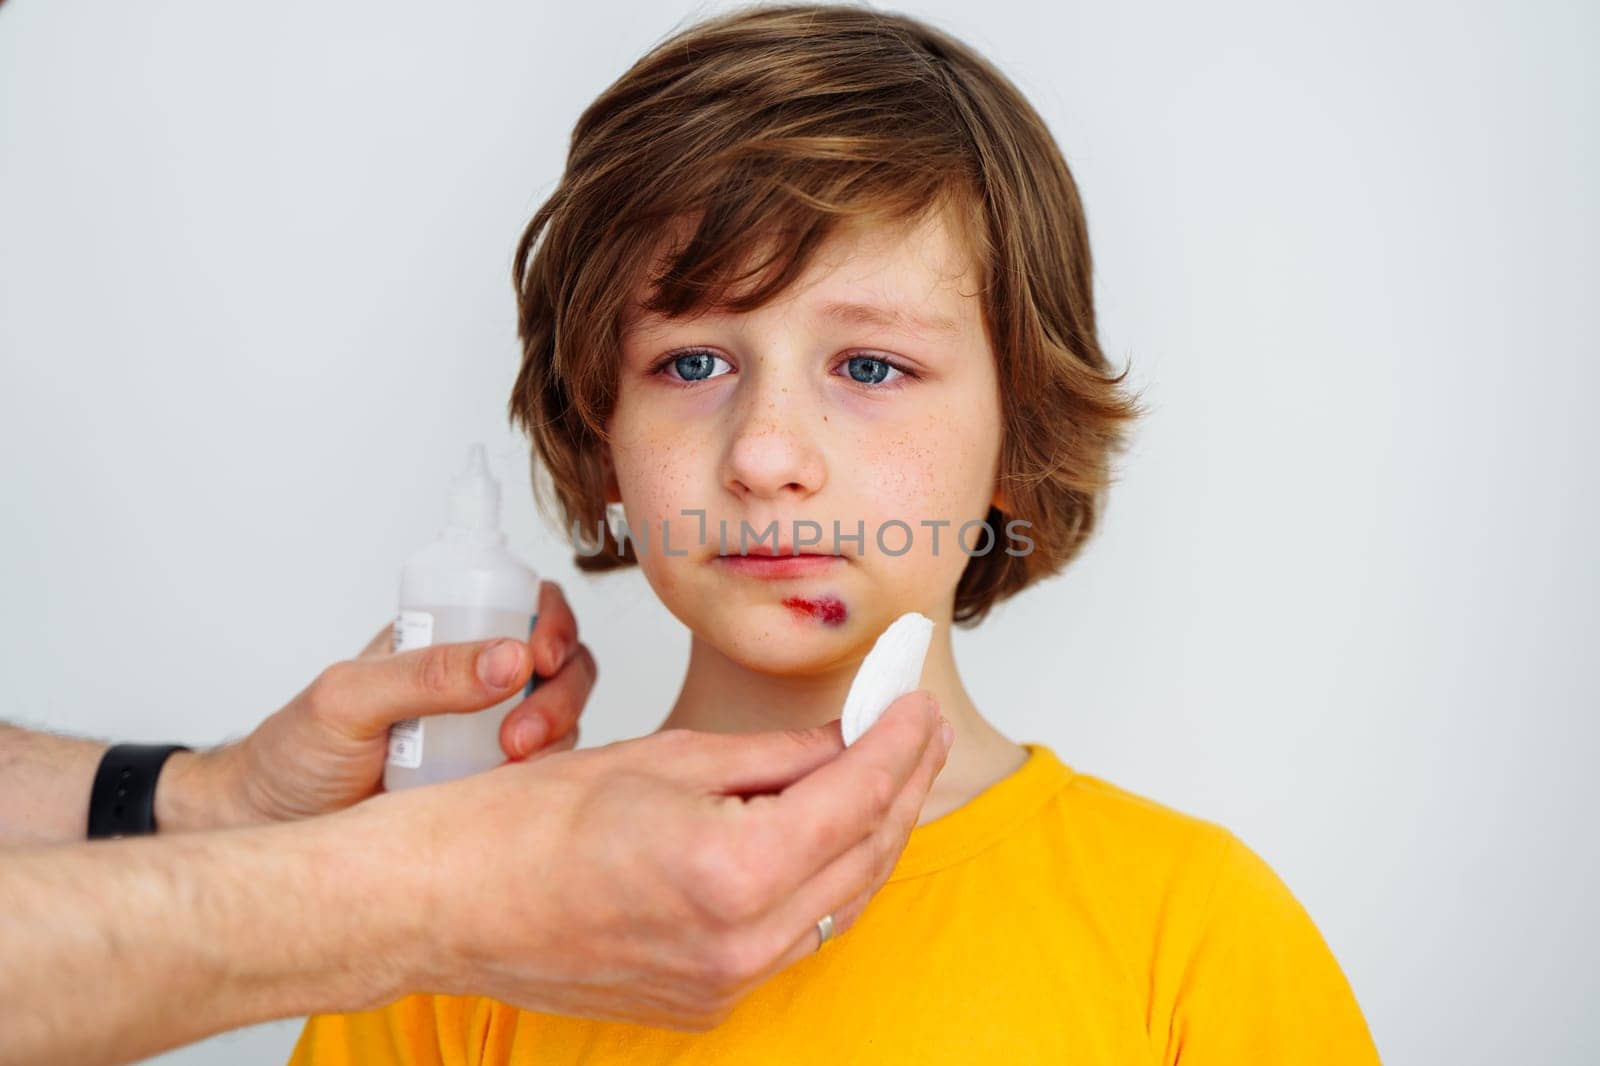 Dad doctor father treats bruised wound on his son school boy kid face. Man cleans addresses the sore wound on child face on white background with copy space for text by Ostanina